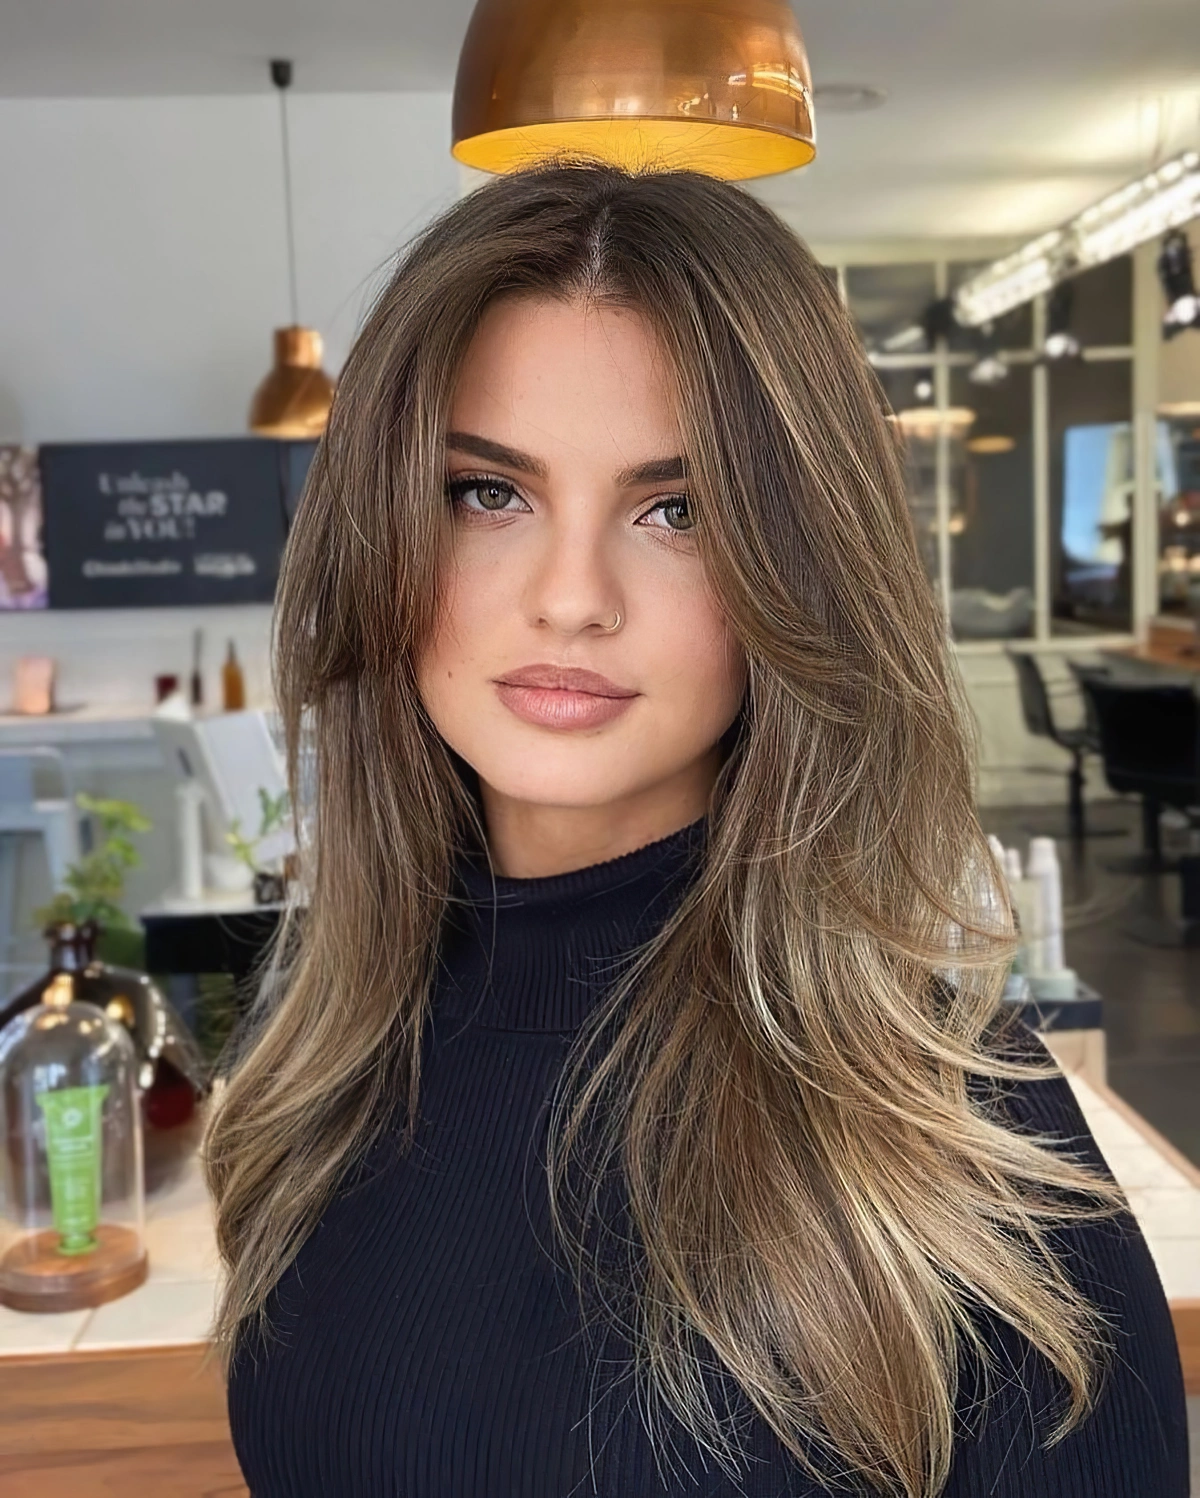 balayage naturel brune cheveux tres longs couches meche visage nude make up